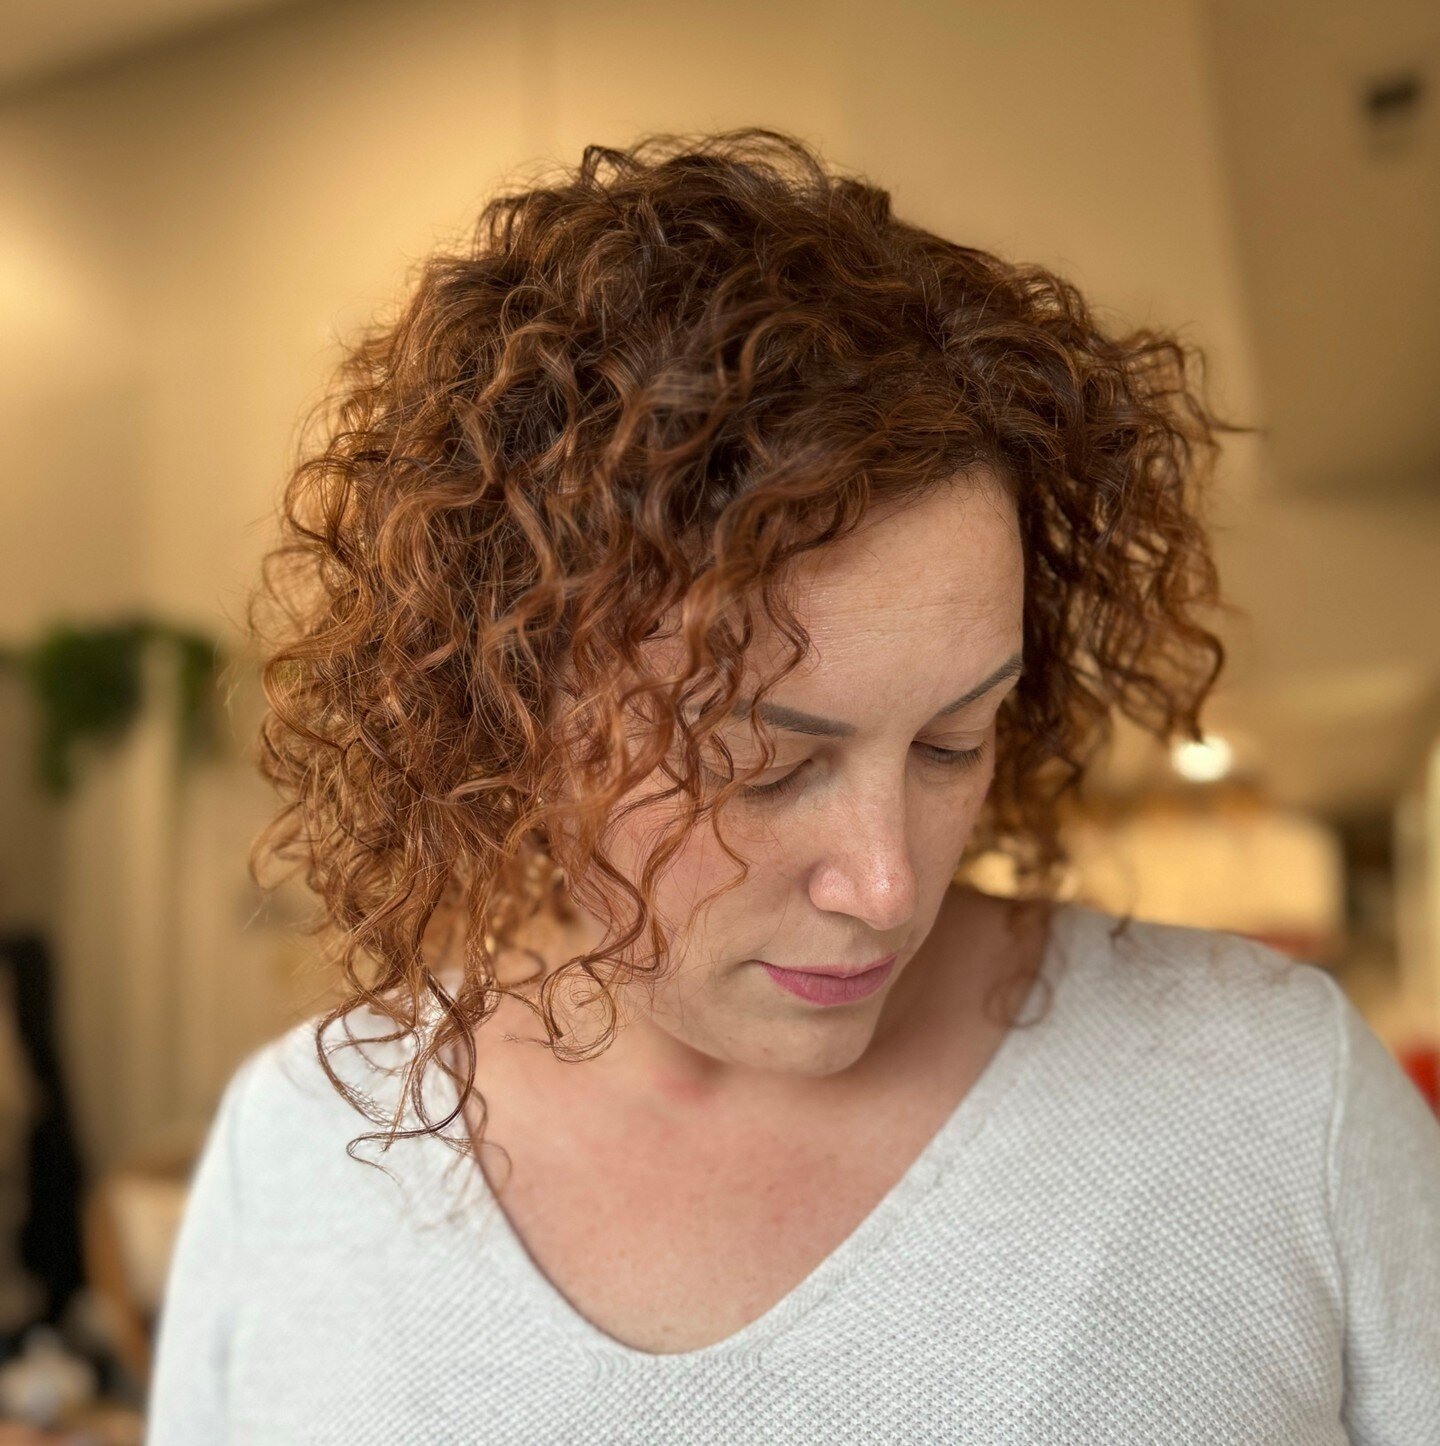 Hello, beautiful people! Are you ready to brighten up your copper curls? As your go-to hair stylist, I'm here to help you achieve the perfect shade of red that will enhance your natural beauty.

With my expertise and the use of high-quality hair prod